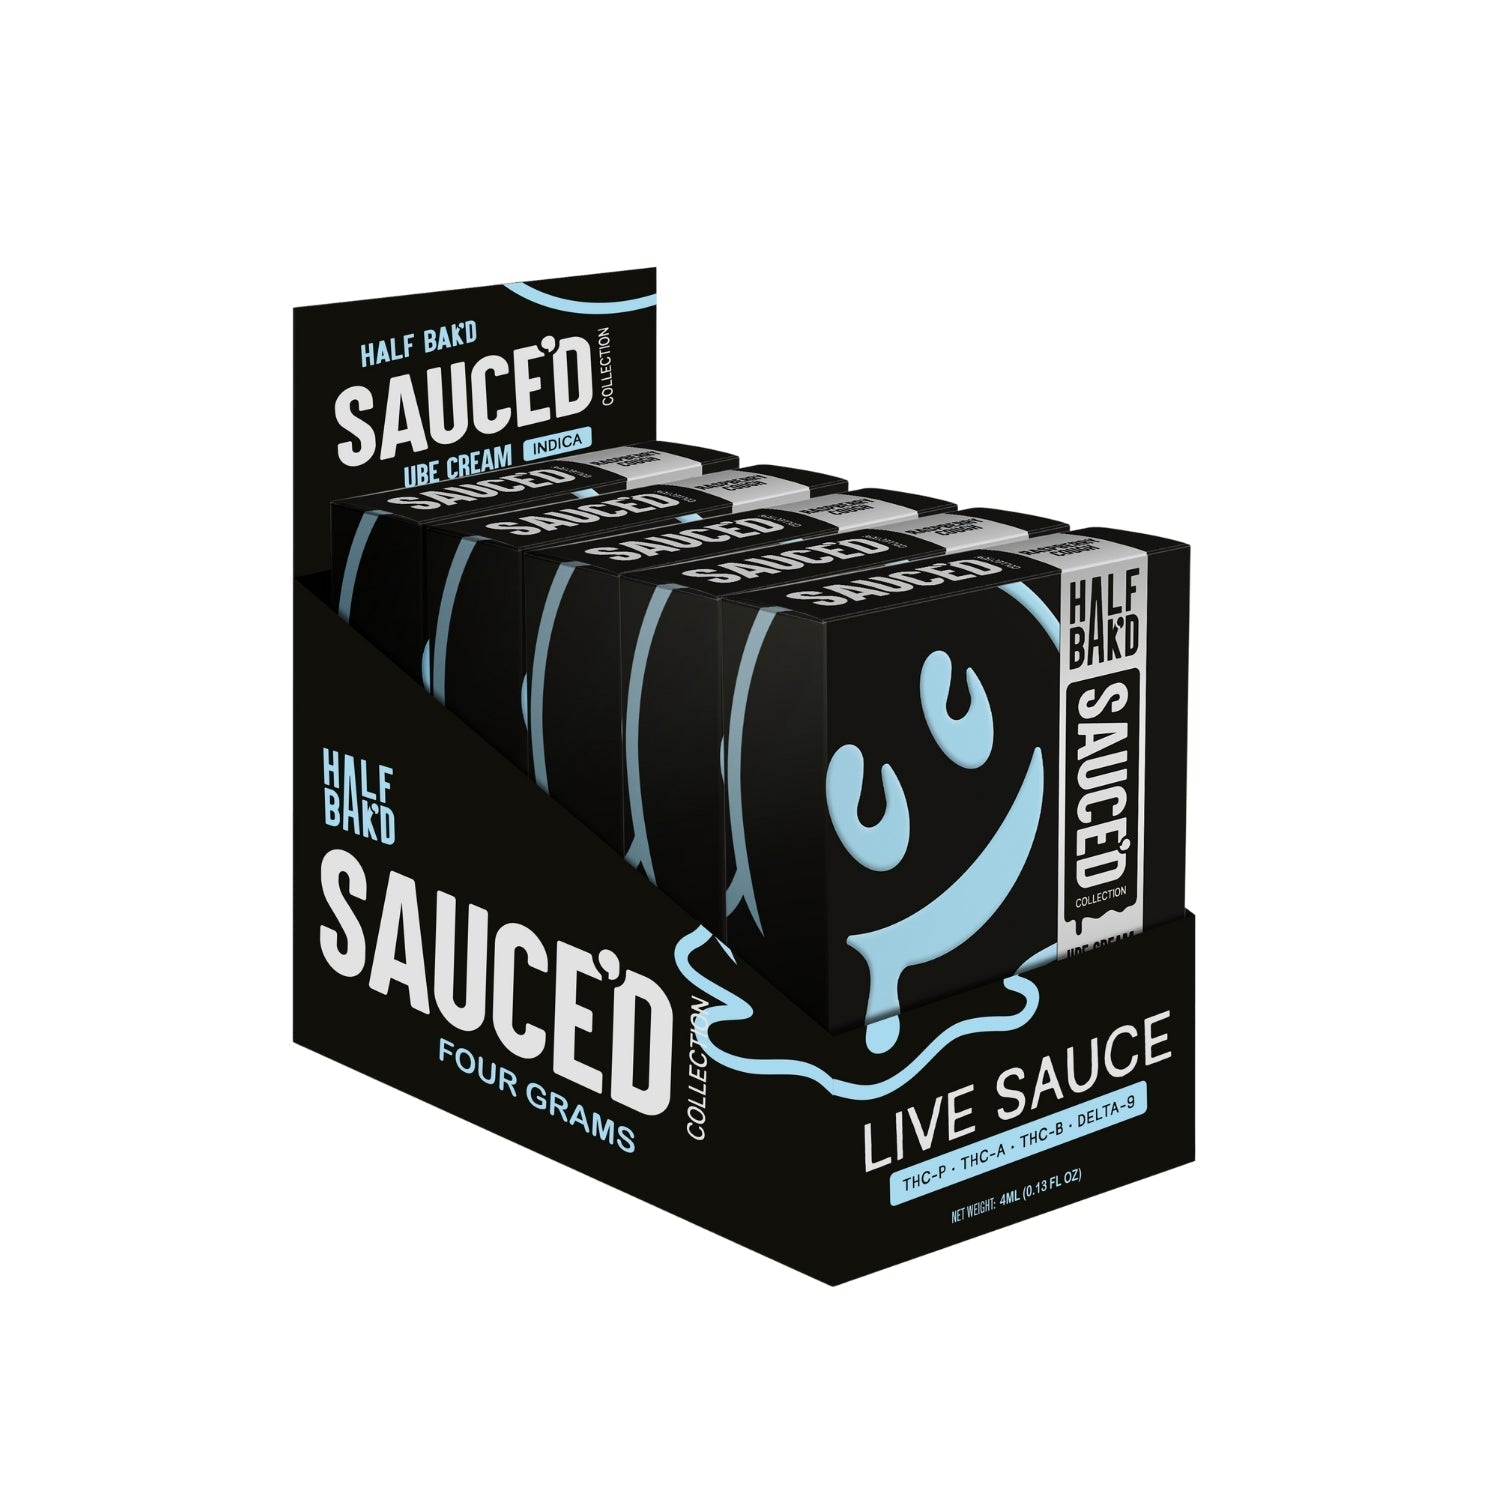 Half Bak'd Ube Cream by SAUCE'D Collection | 4-Gram Live Resin Disposable (Indica) Best Price